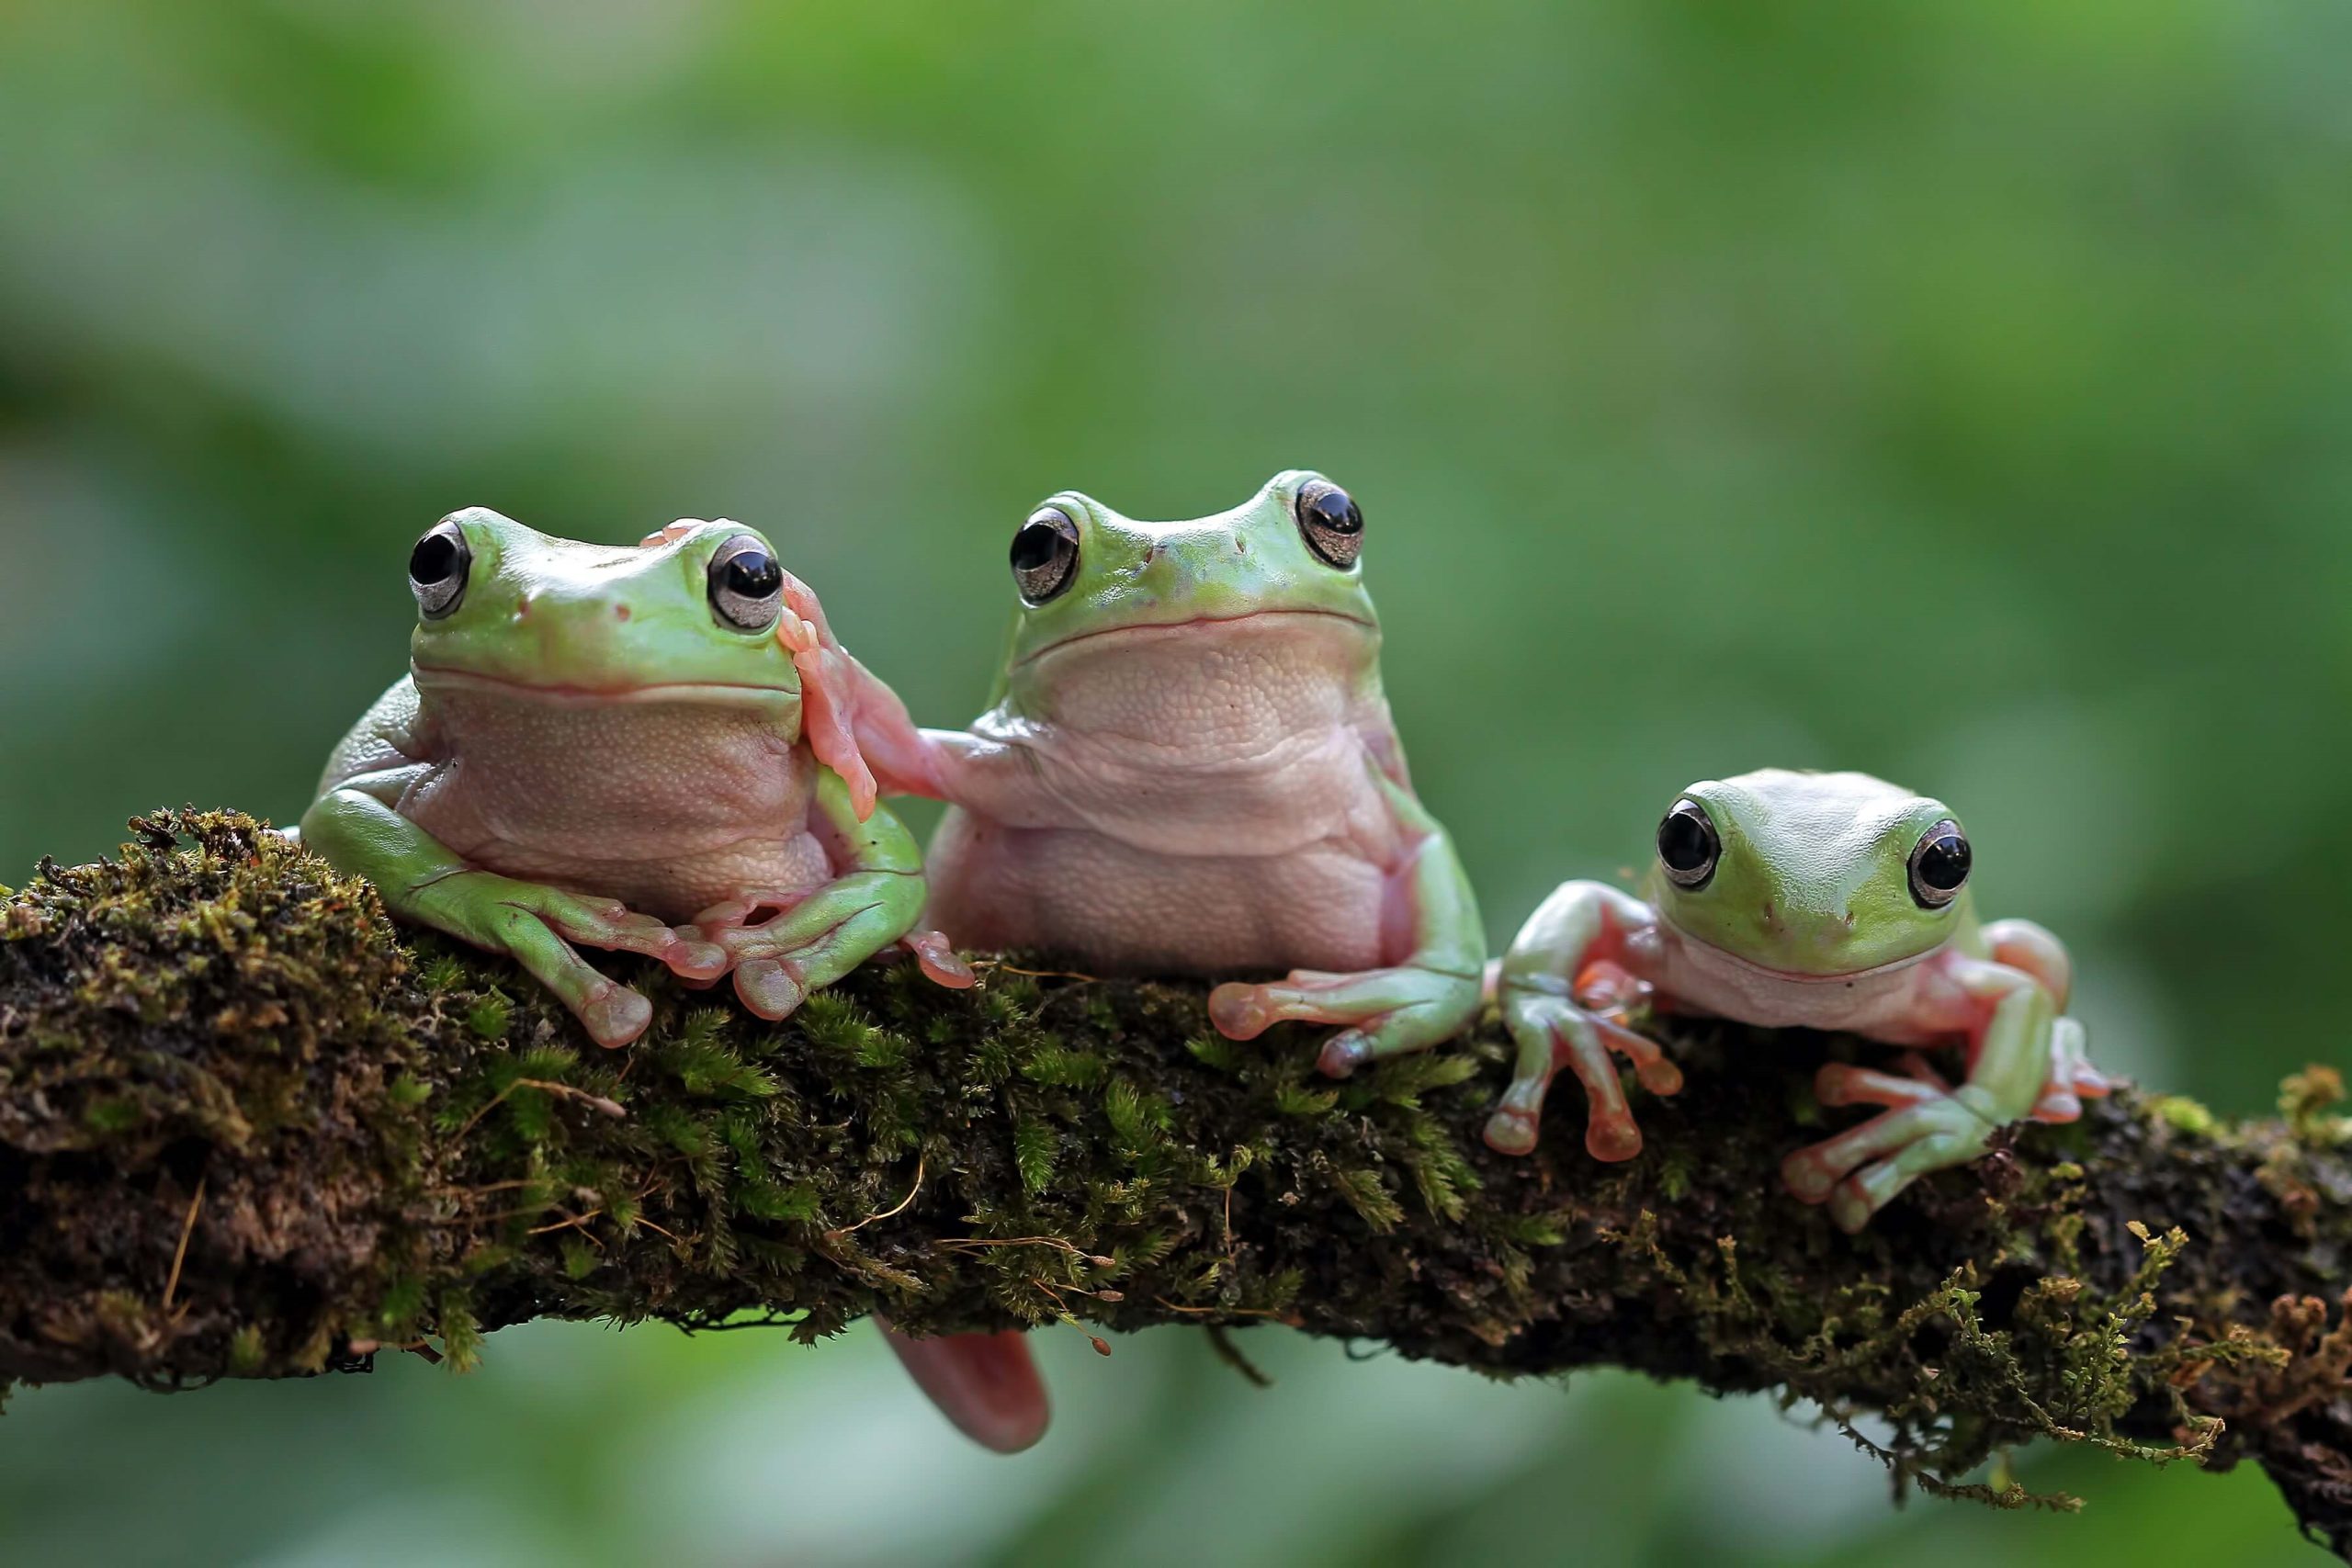 White tree frogs on a branch